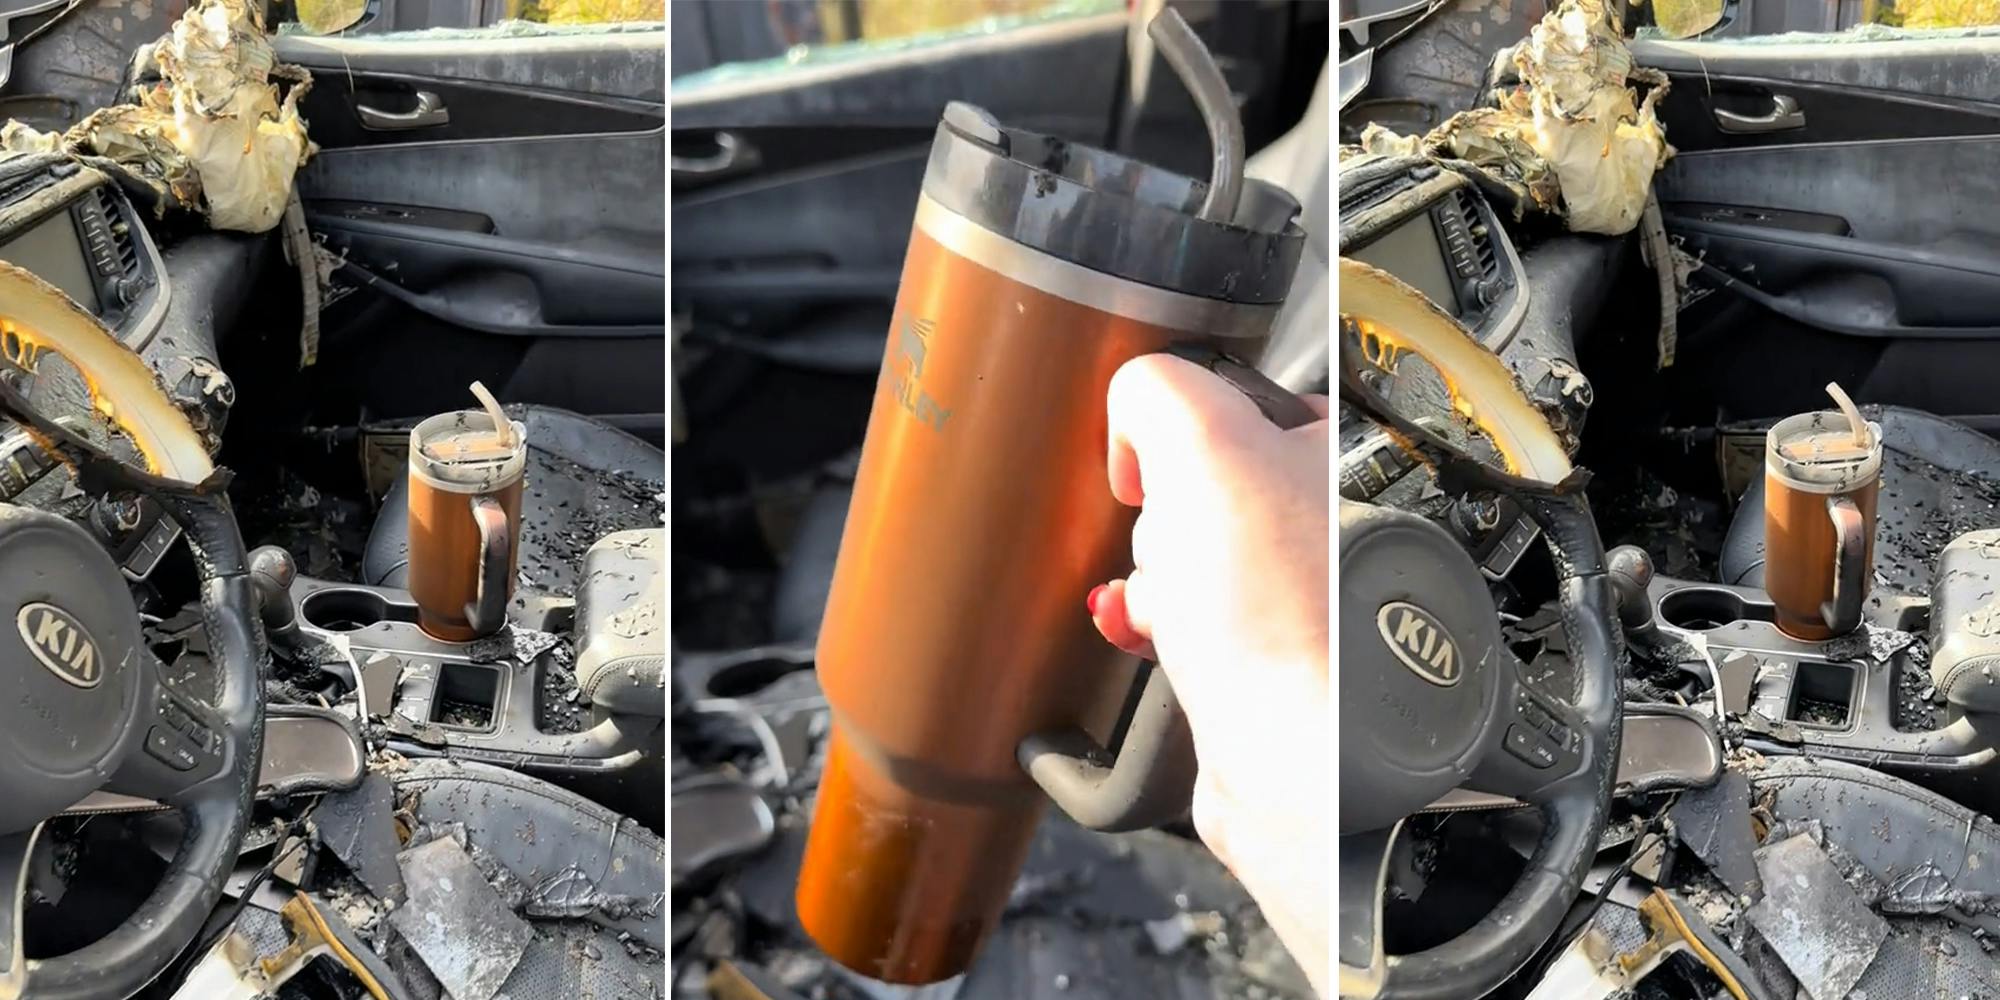 A Stanley cup survived a car fire and went viral. Then the brand gave the  owner a new vehicle